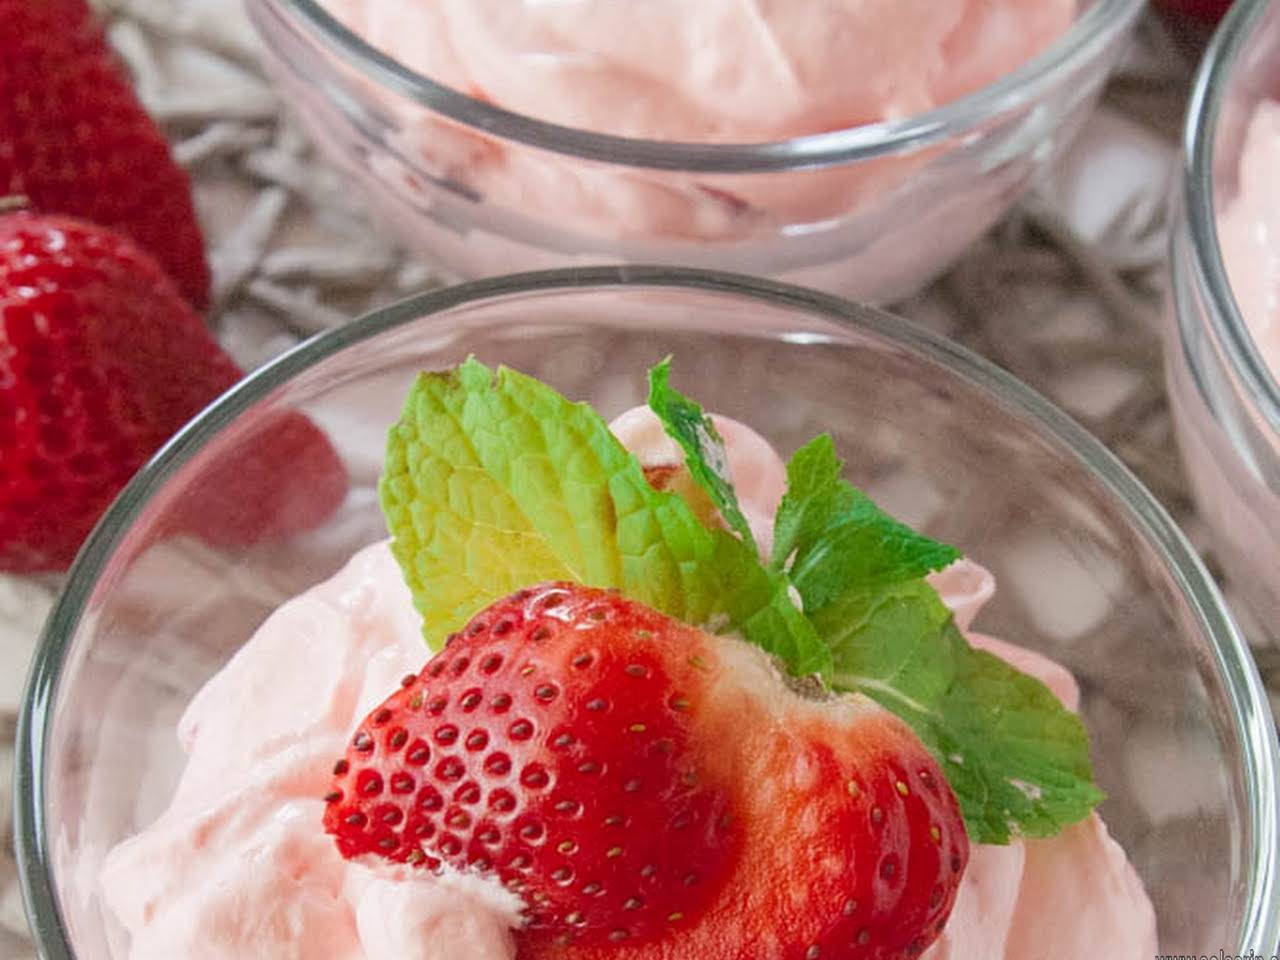 strawberry jello with cool whip recipe